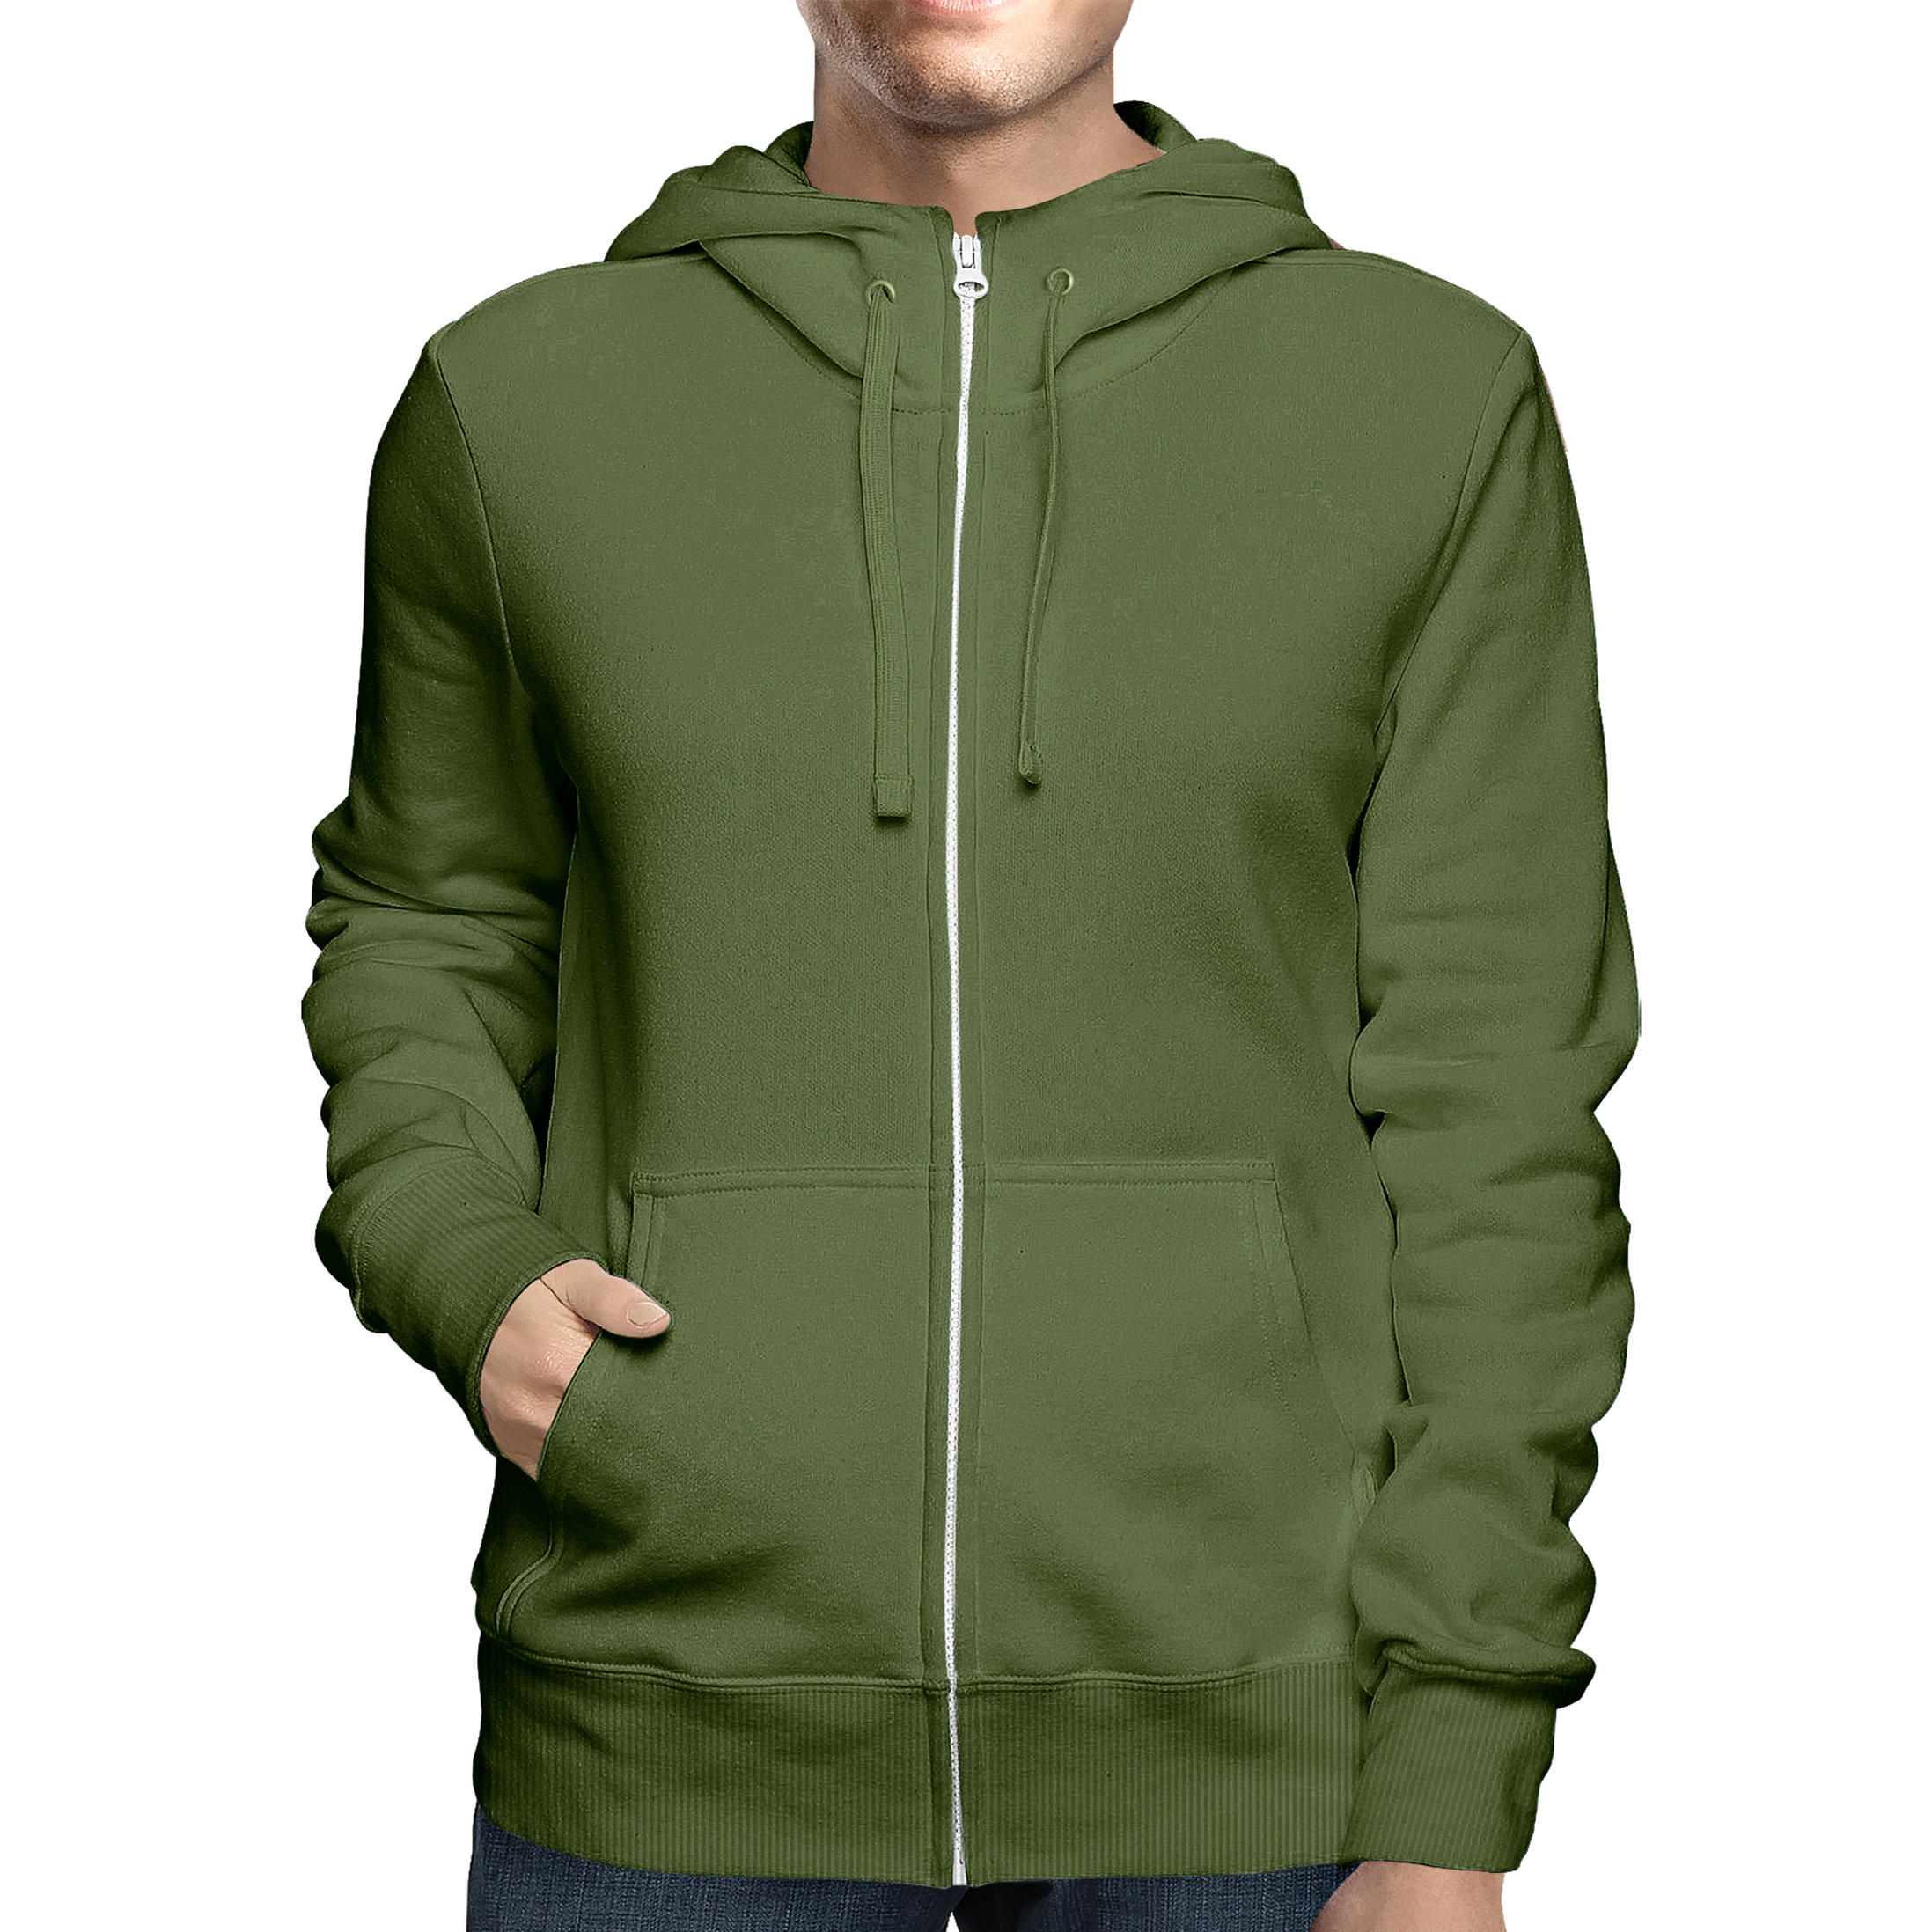 2-Pack: Men's Full Zip Up Fleece-Lined Hoodie Sweatshirt (Big & Tall Size Available) - Olive, 4x-large